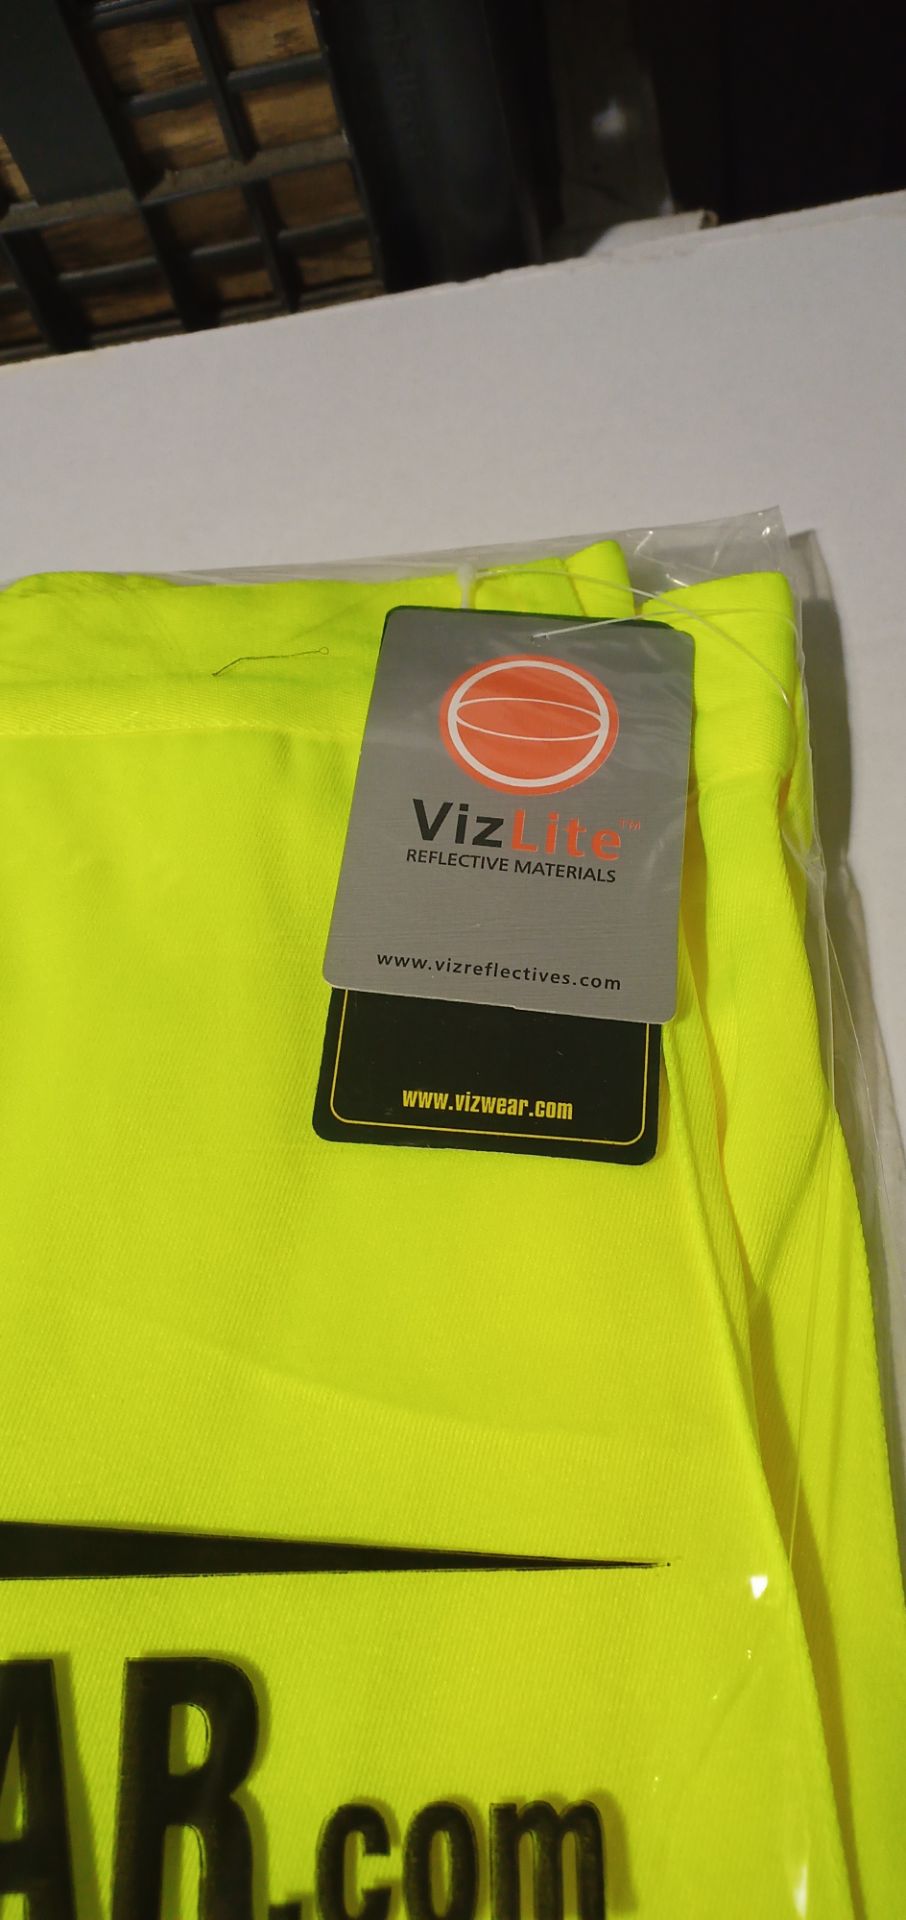 25x BRAND NEW SEALED CARTONS, SIZE 2XL CARGO TROUSERS ARE VIZWEAR BRAND *PLUS VAT* - Image 7 of 8